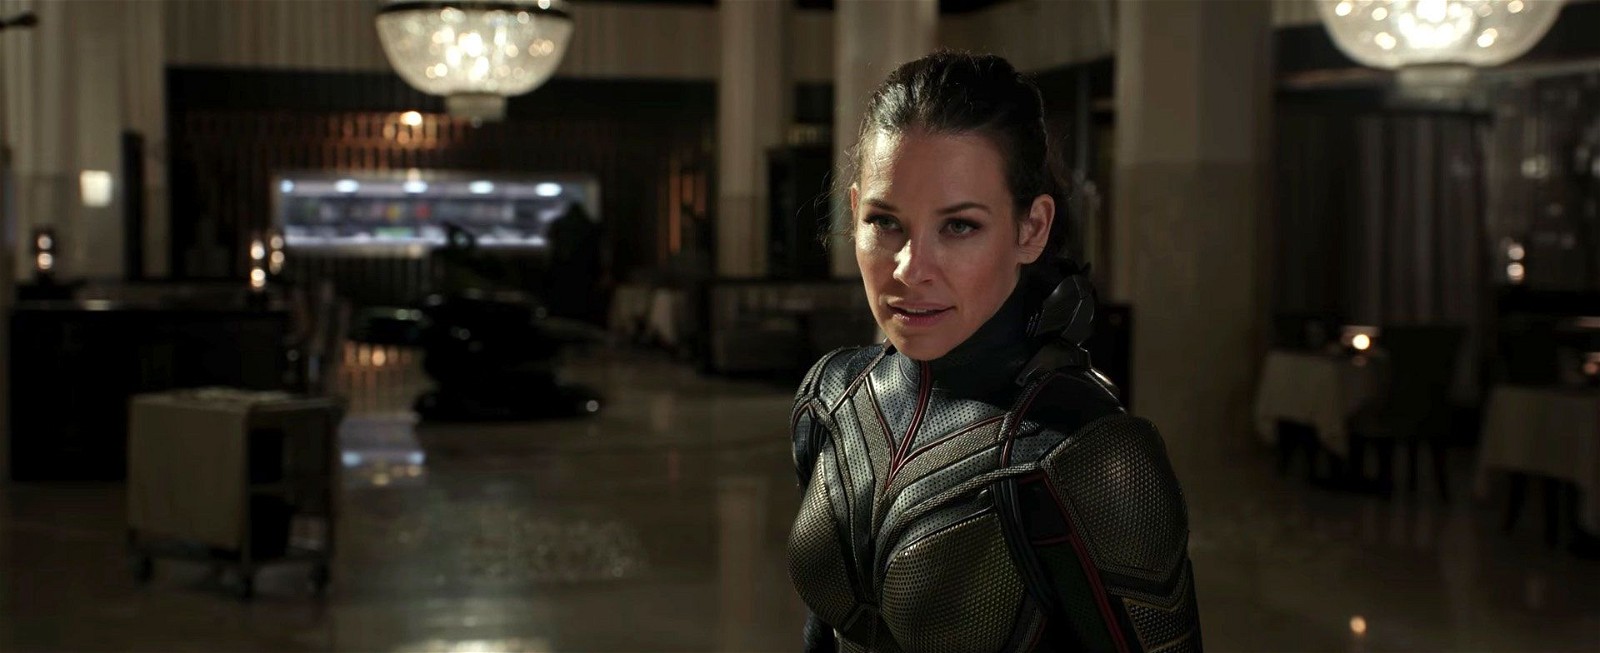 Fans support Evangeline Lilly in her decision of retirement